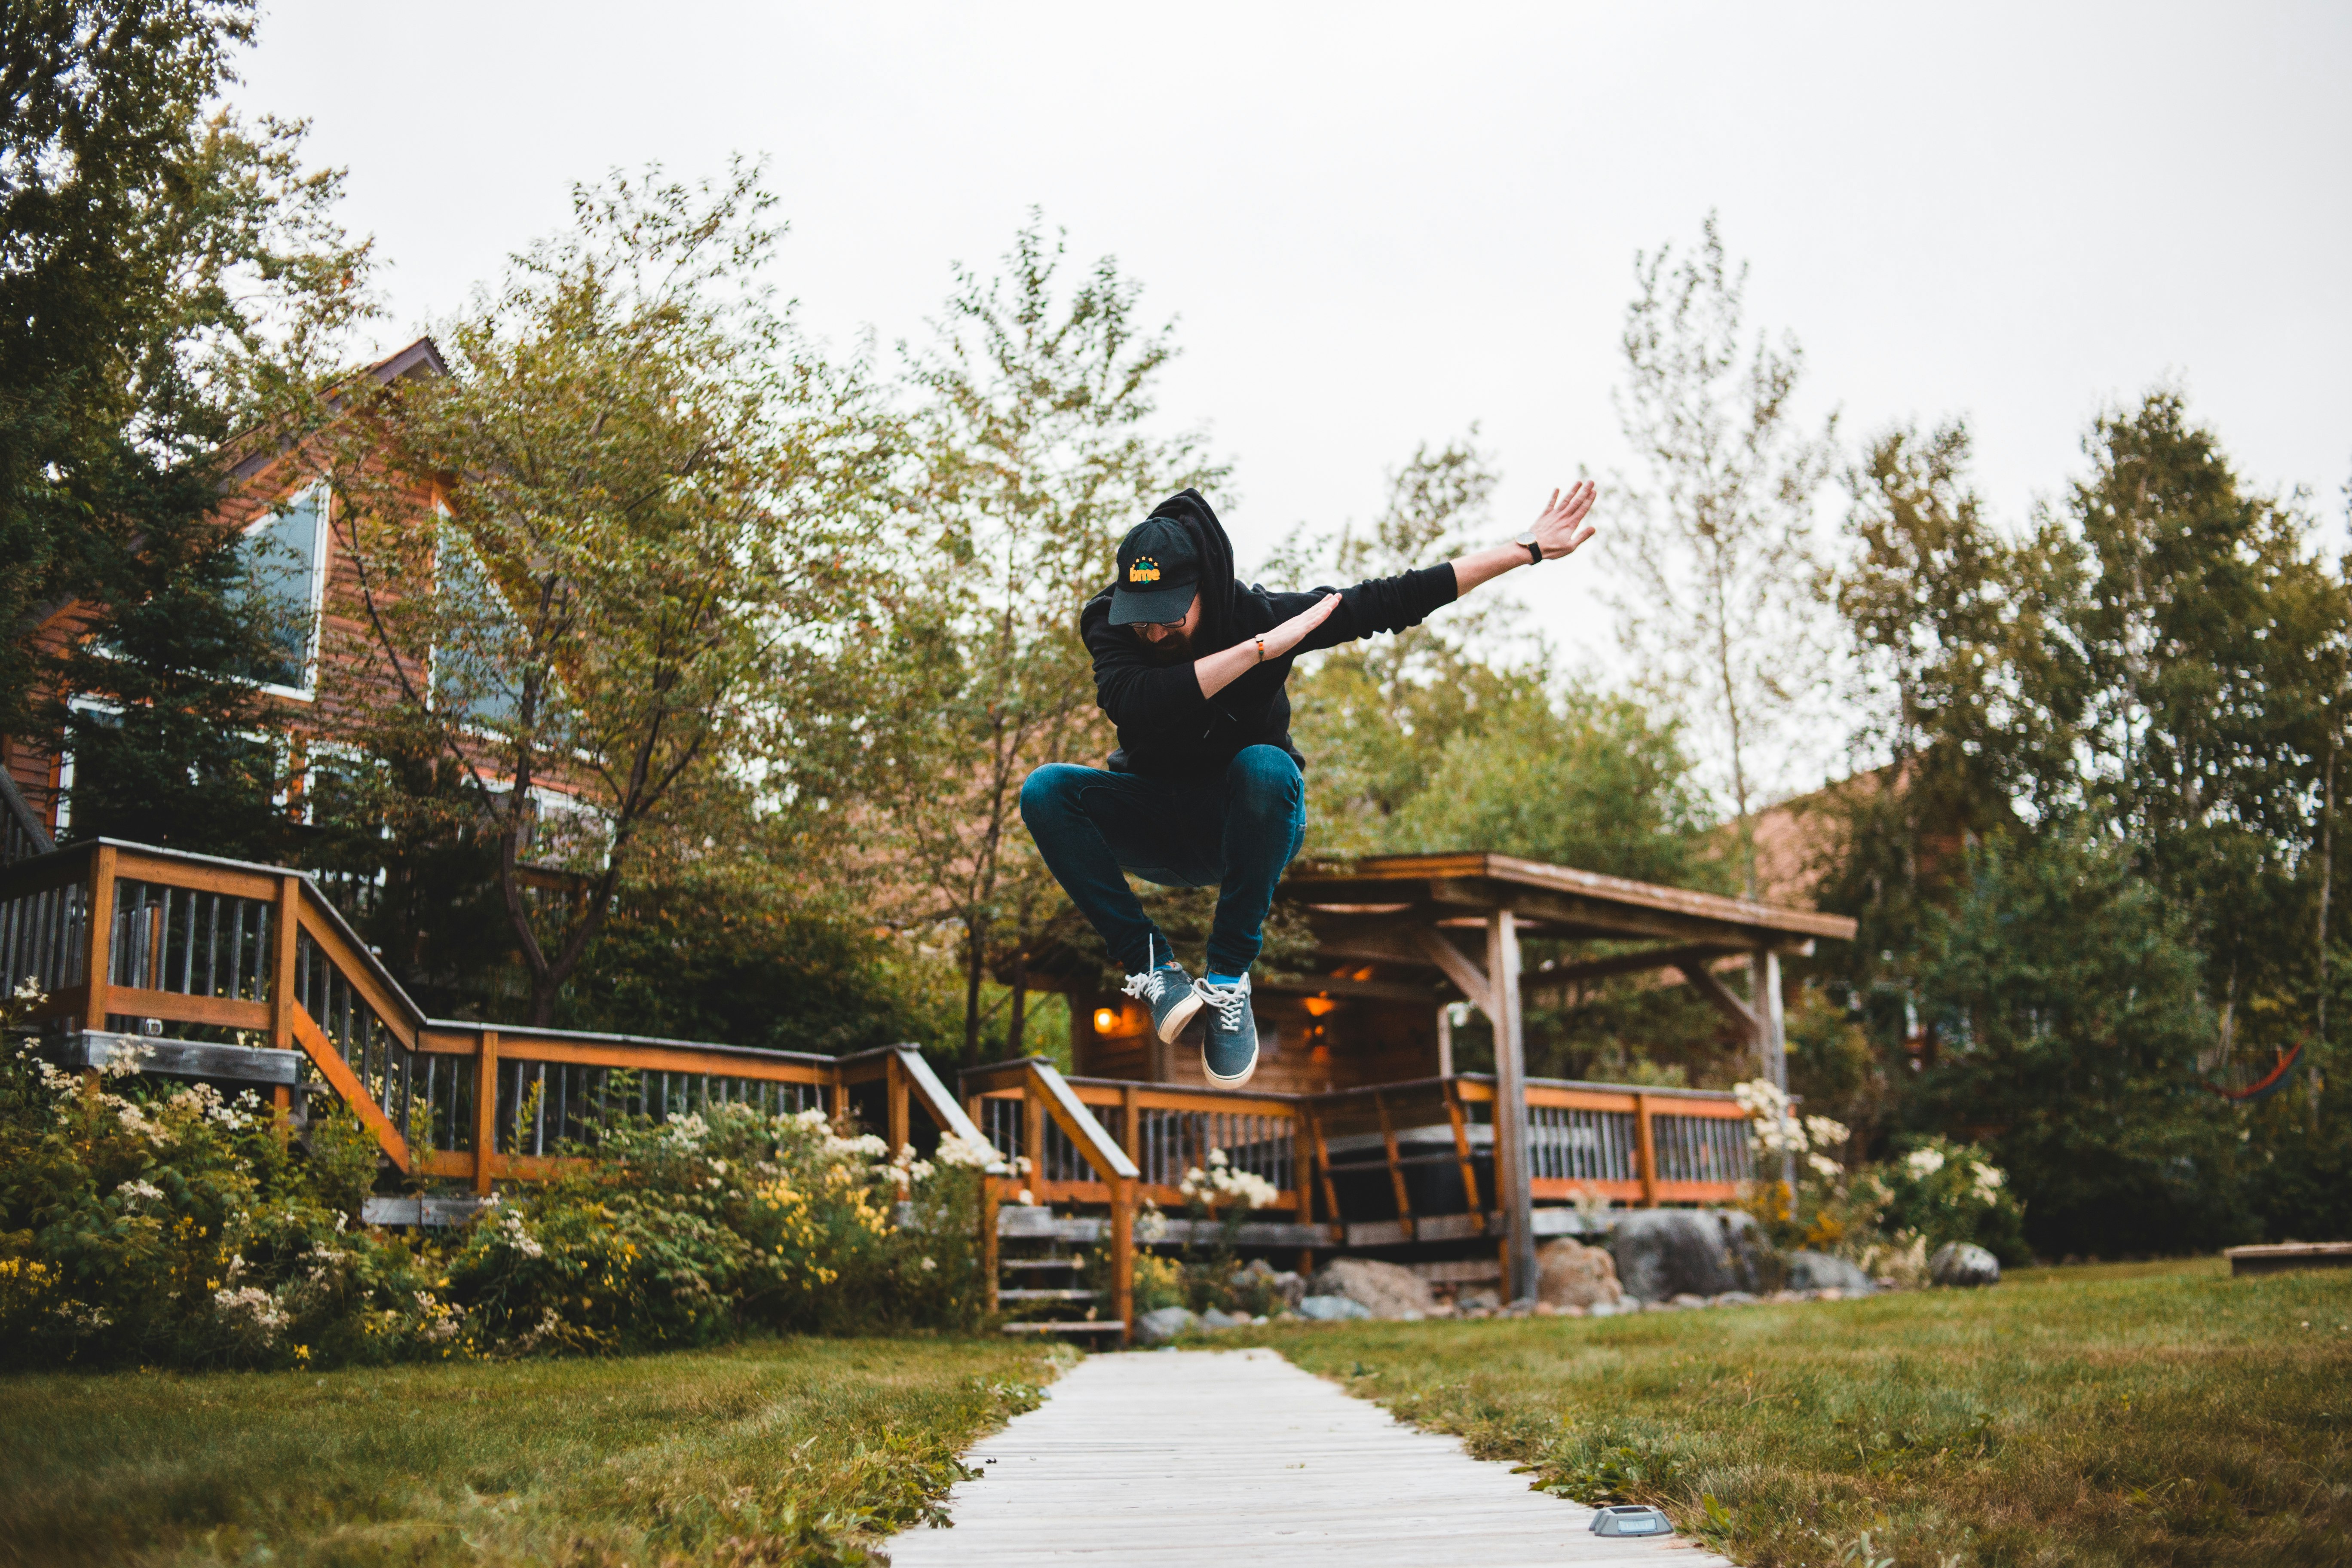 photography of man jumping near outdoor during daytime